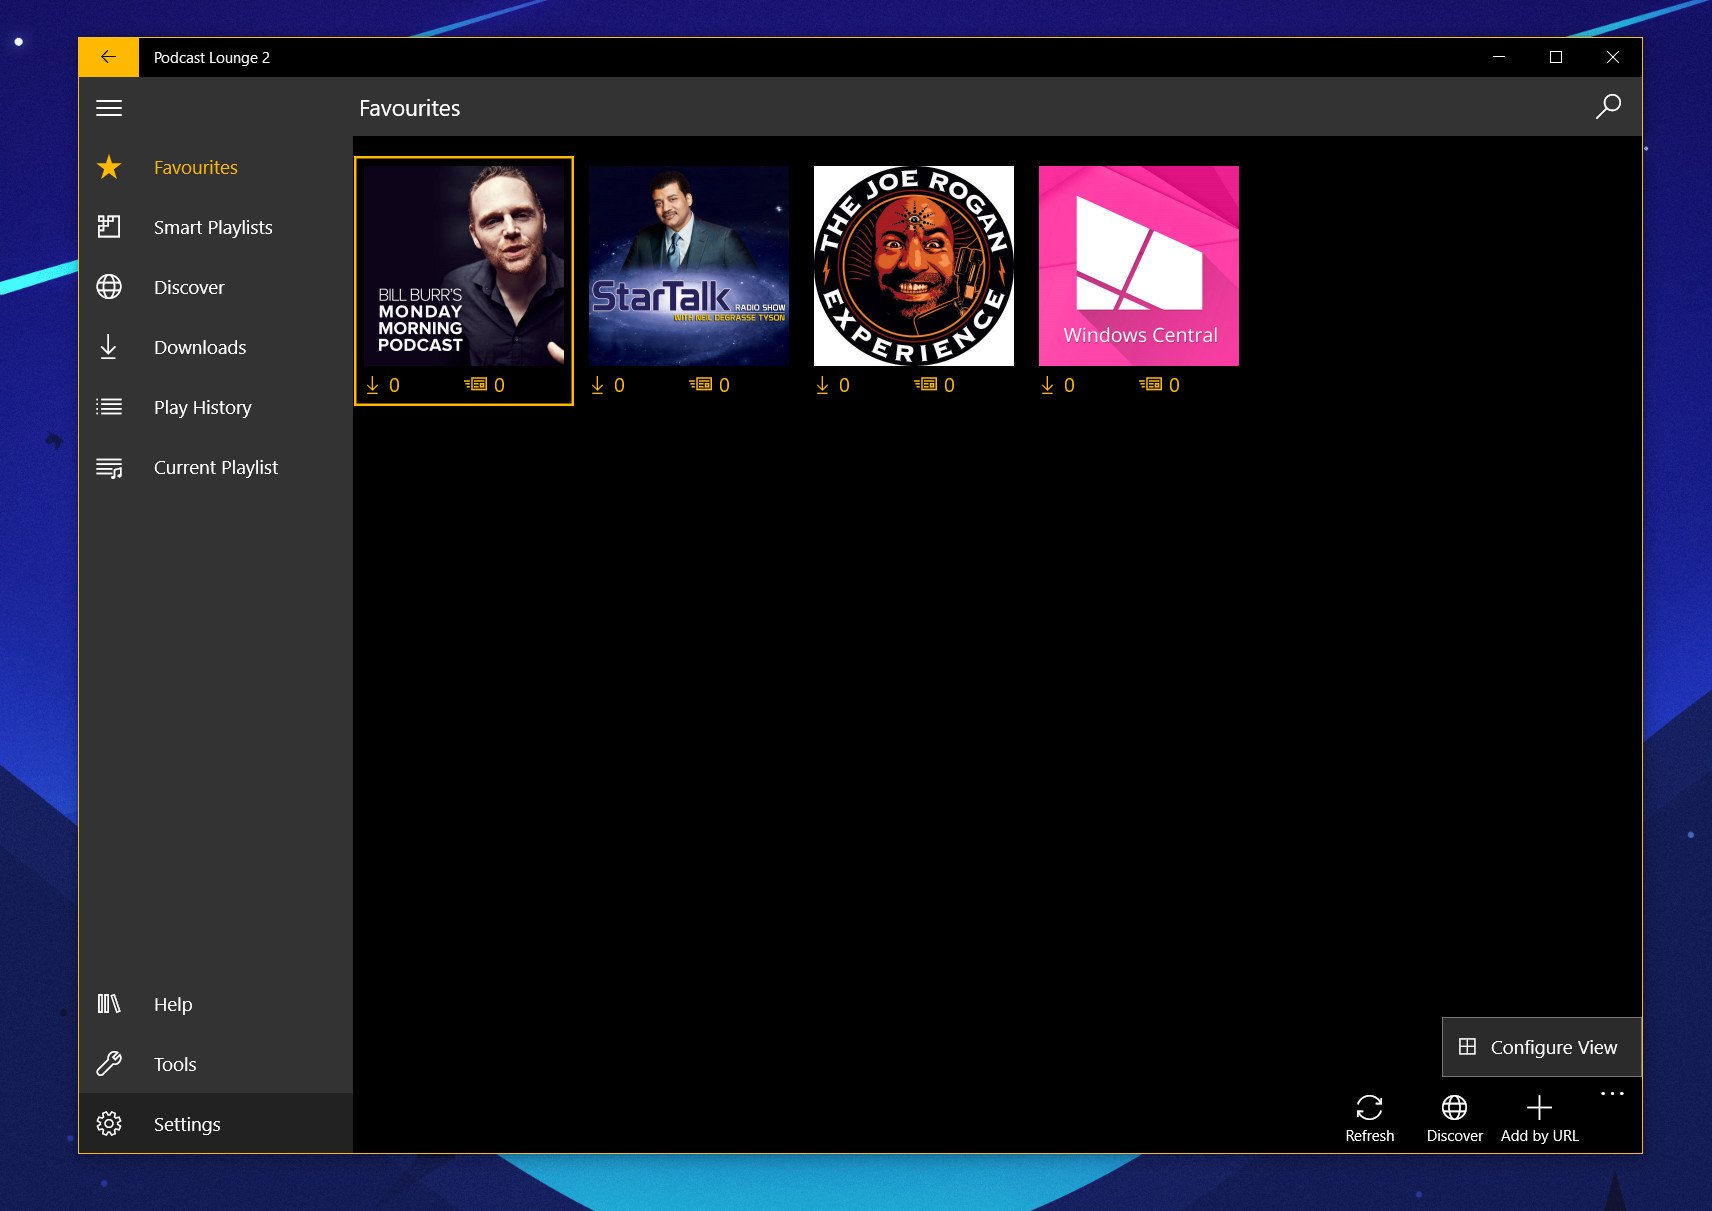 Podcast Lounge 2 hits open beta for Windows 10 PC and Mobile